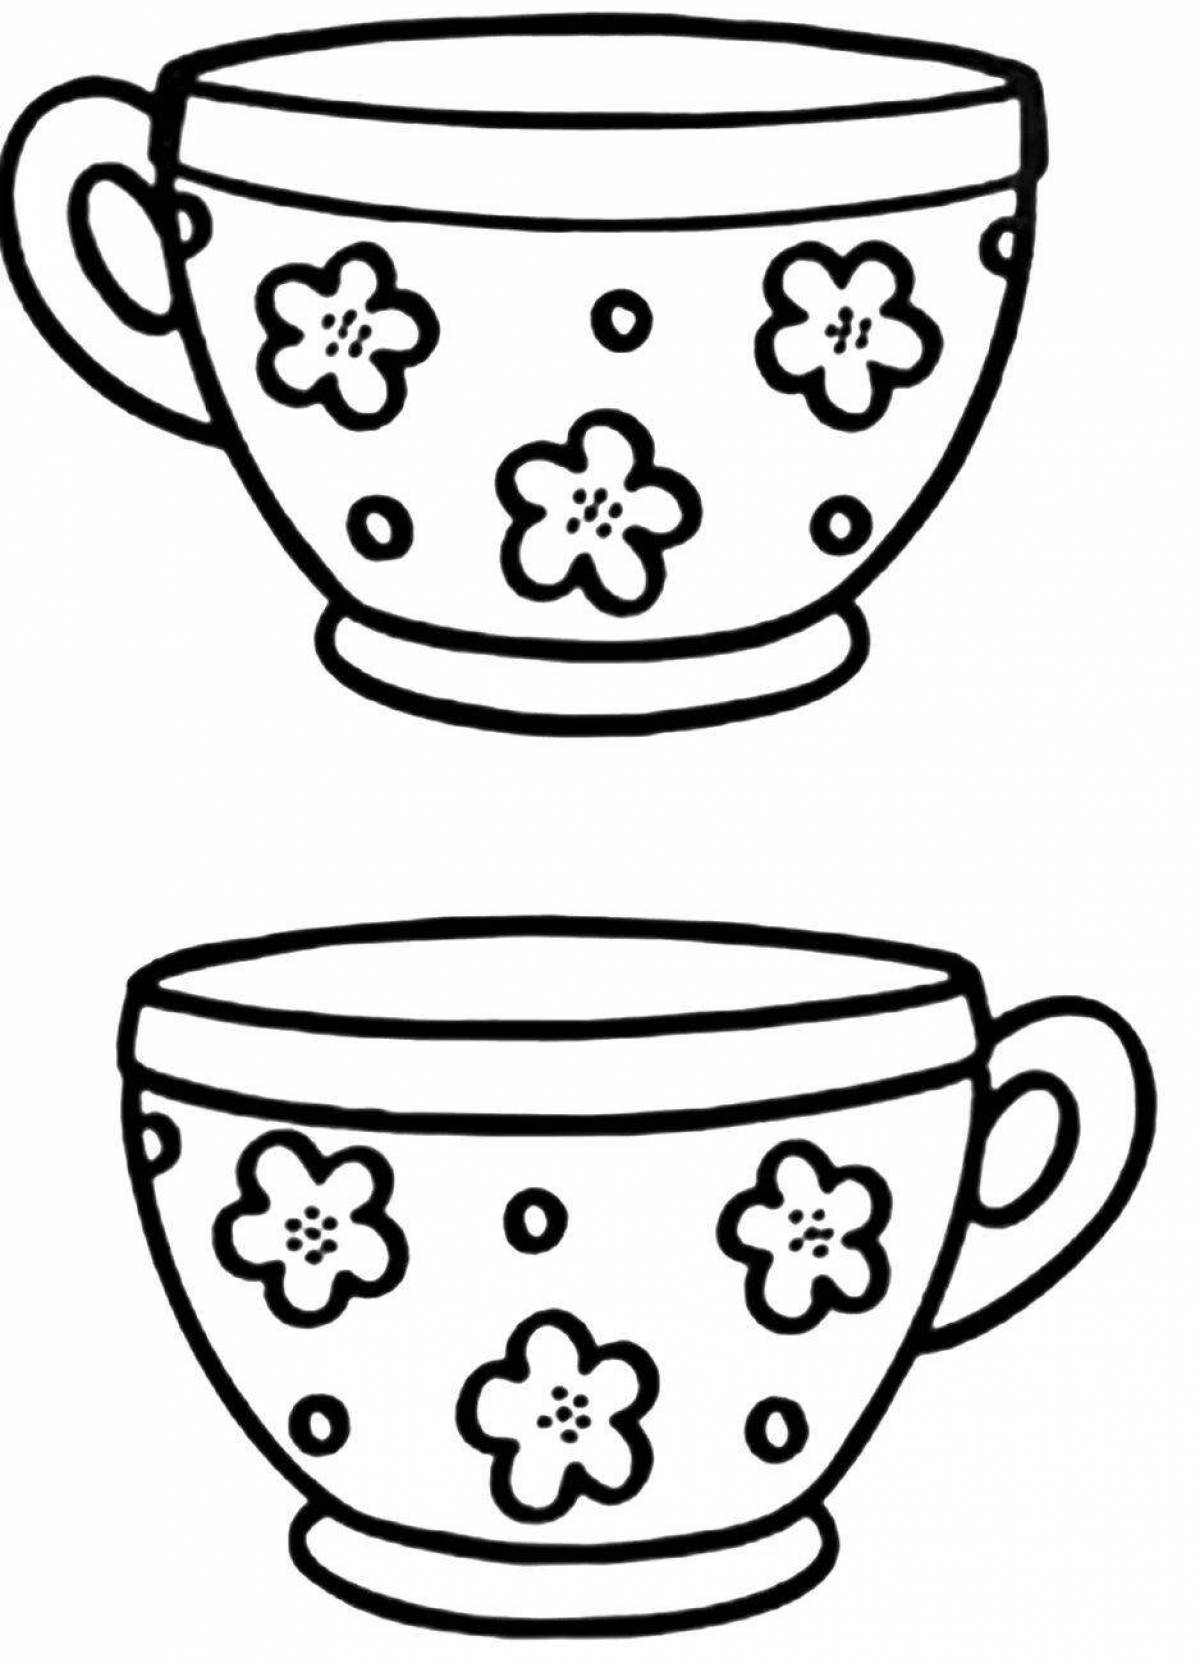 Playful coloring mug for 4-5 year olds